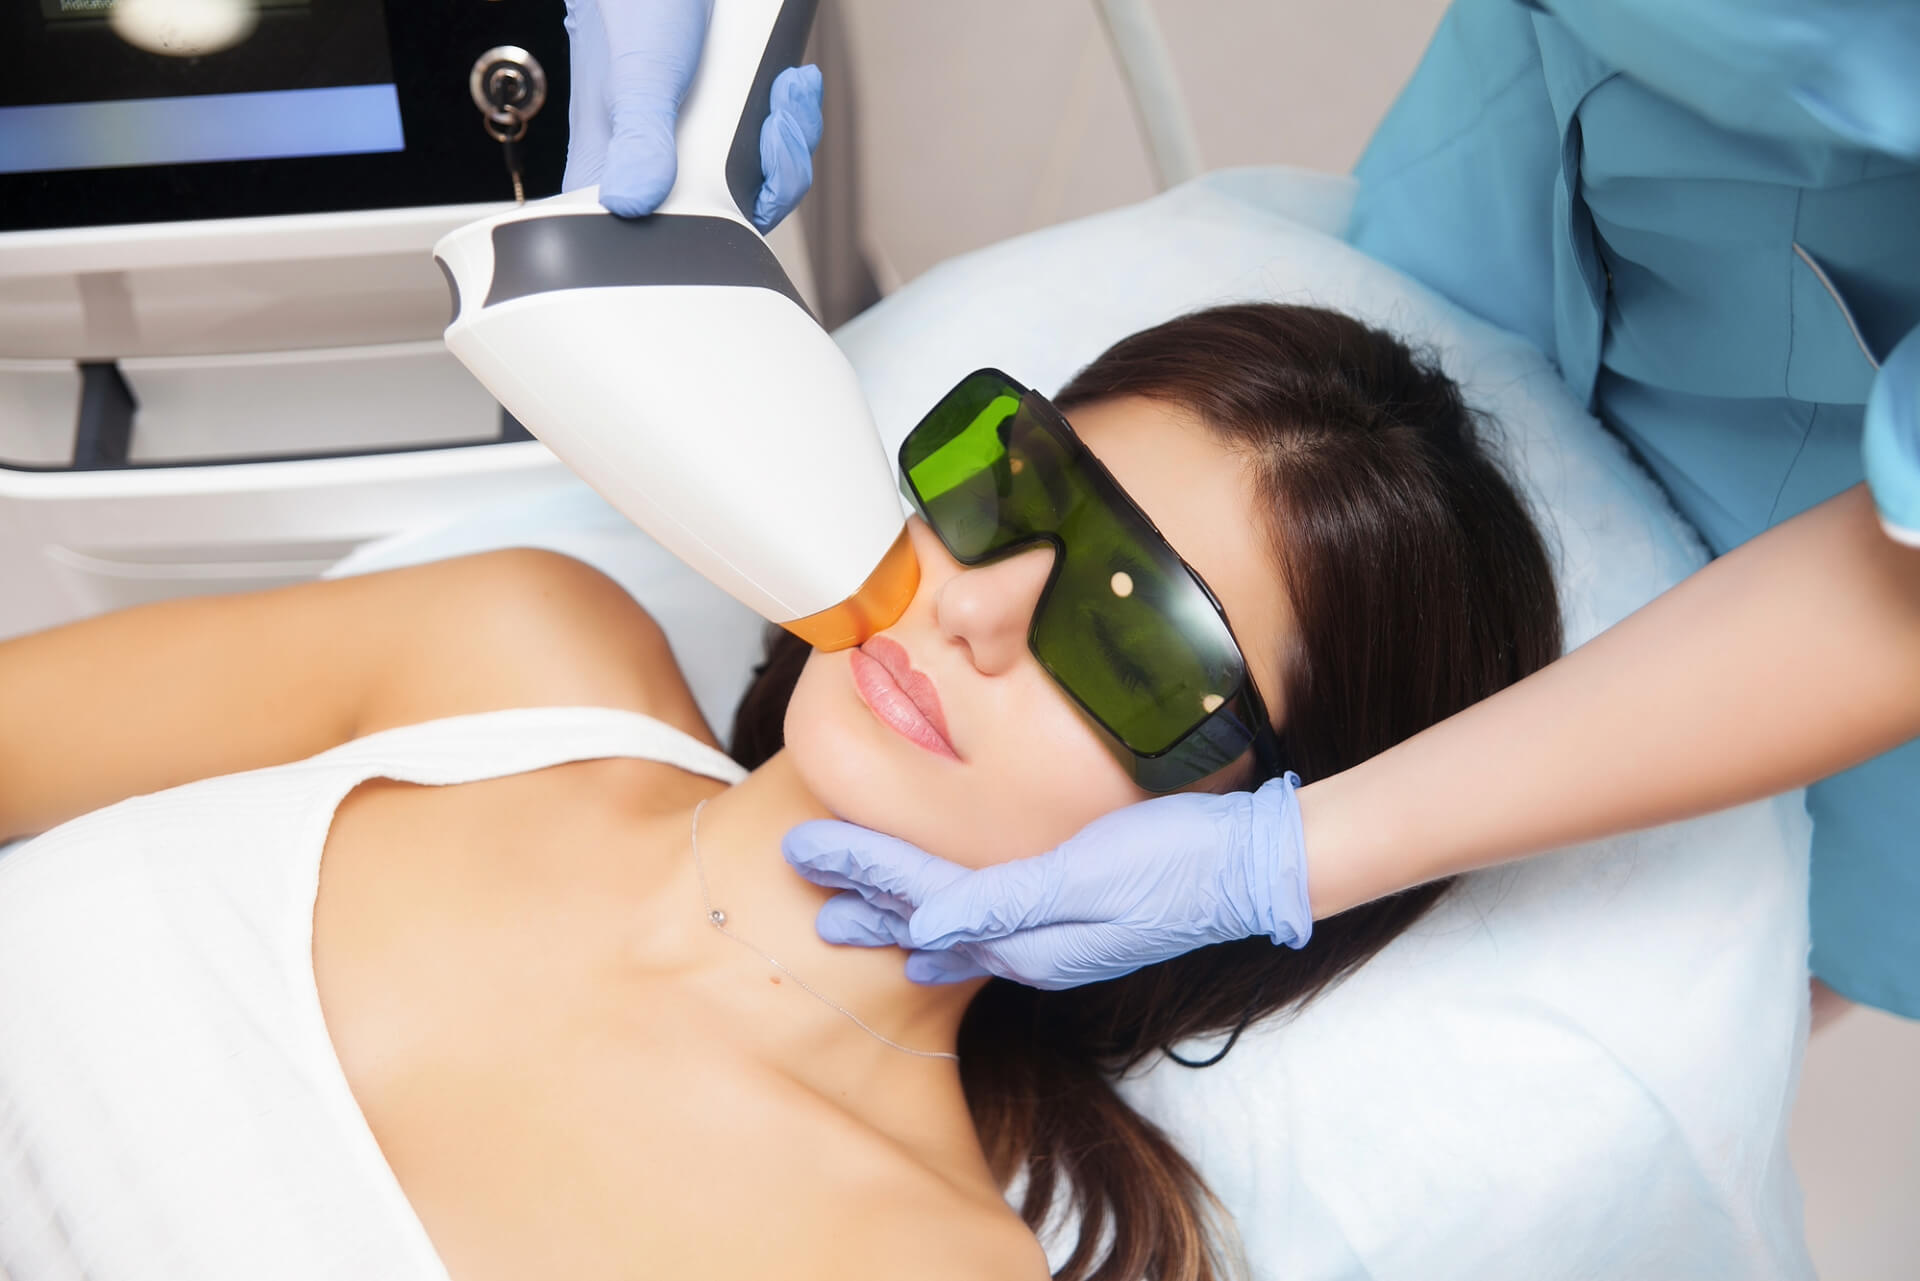 Five reasons why our patients love the Halo laser skin treatment and procedure at Kirsch Dermatology